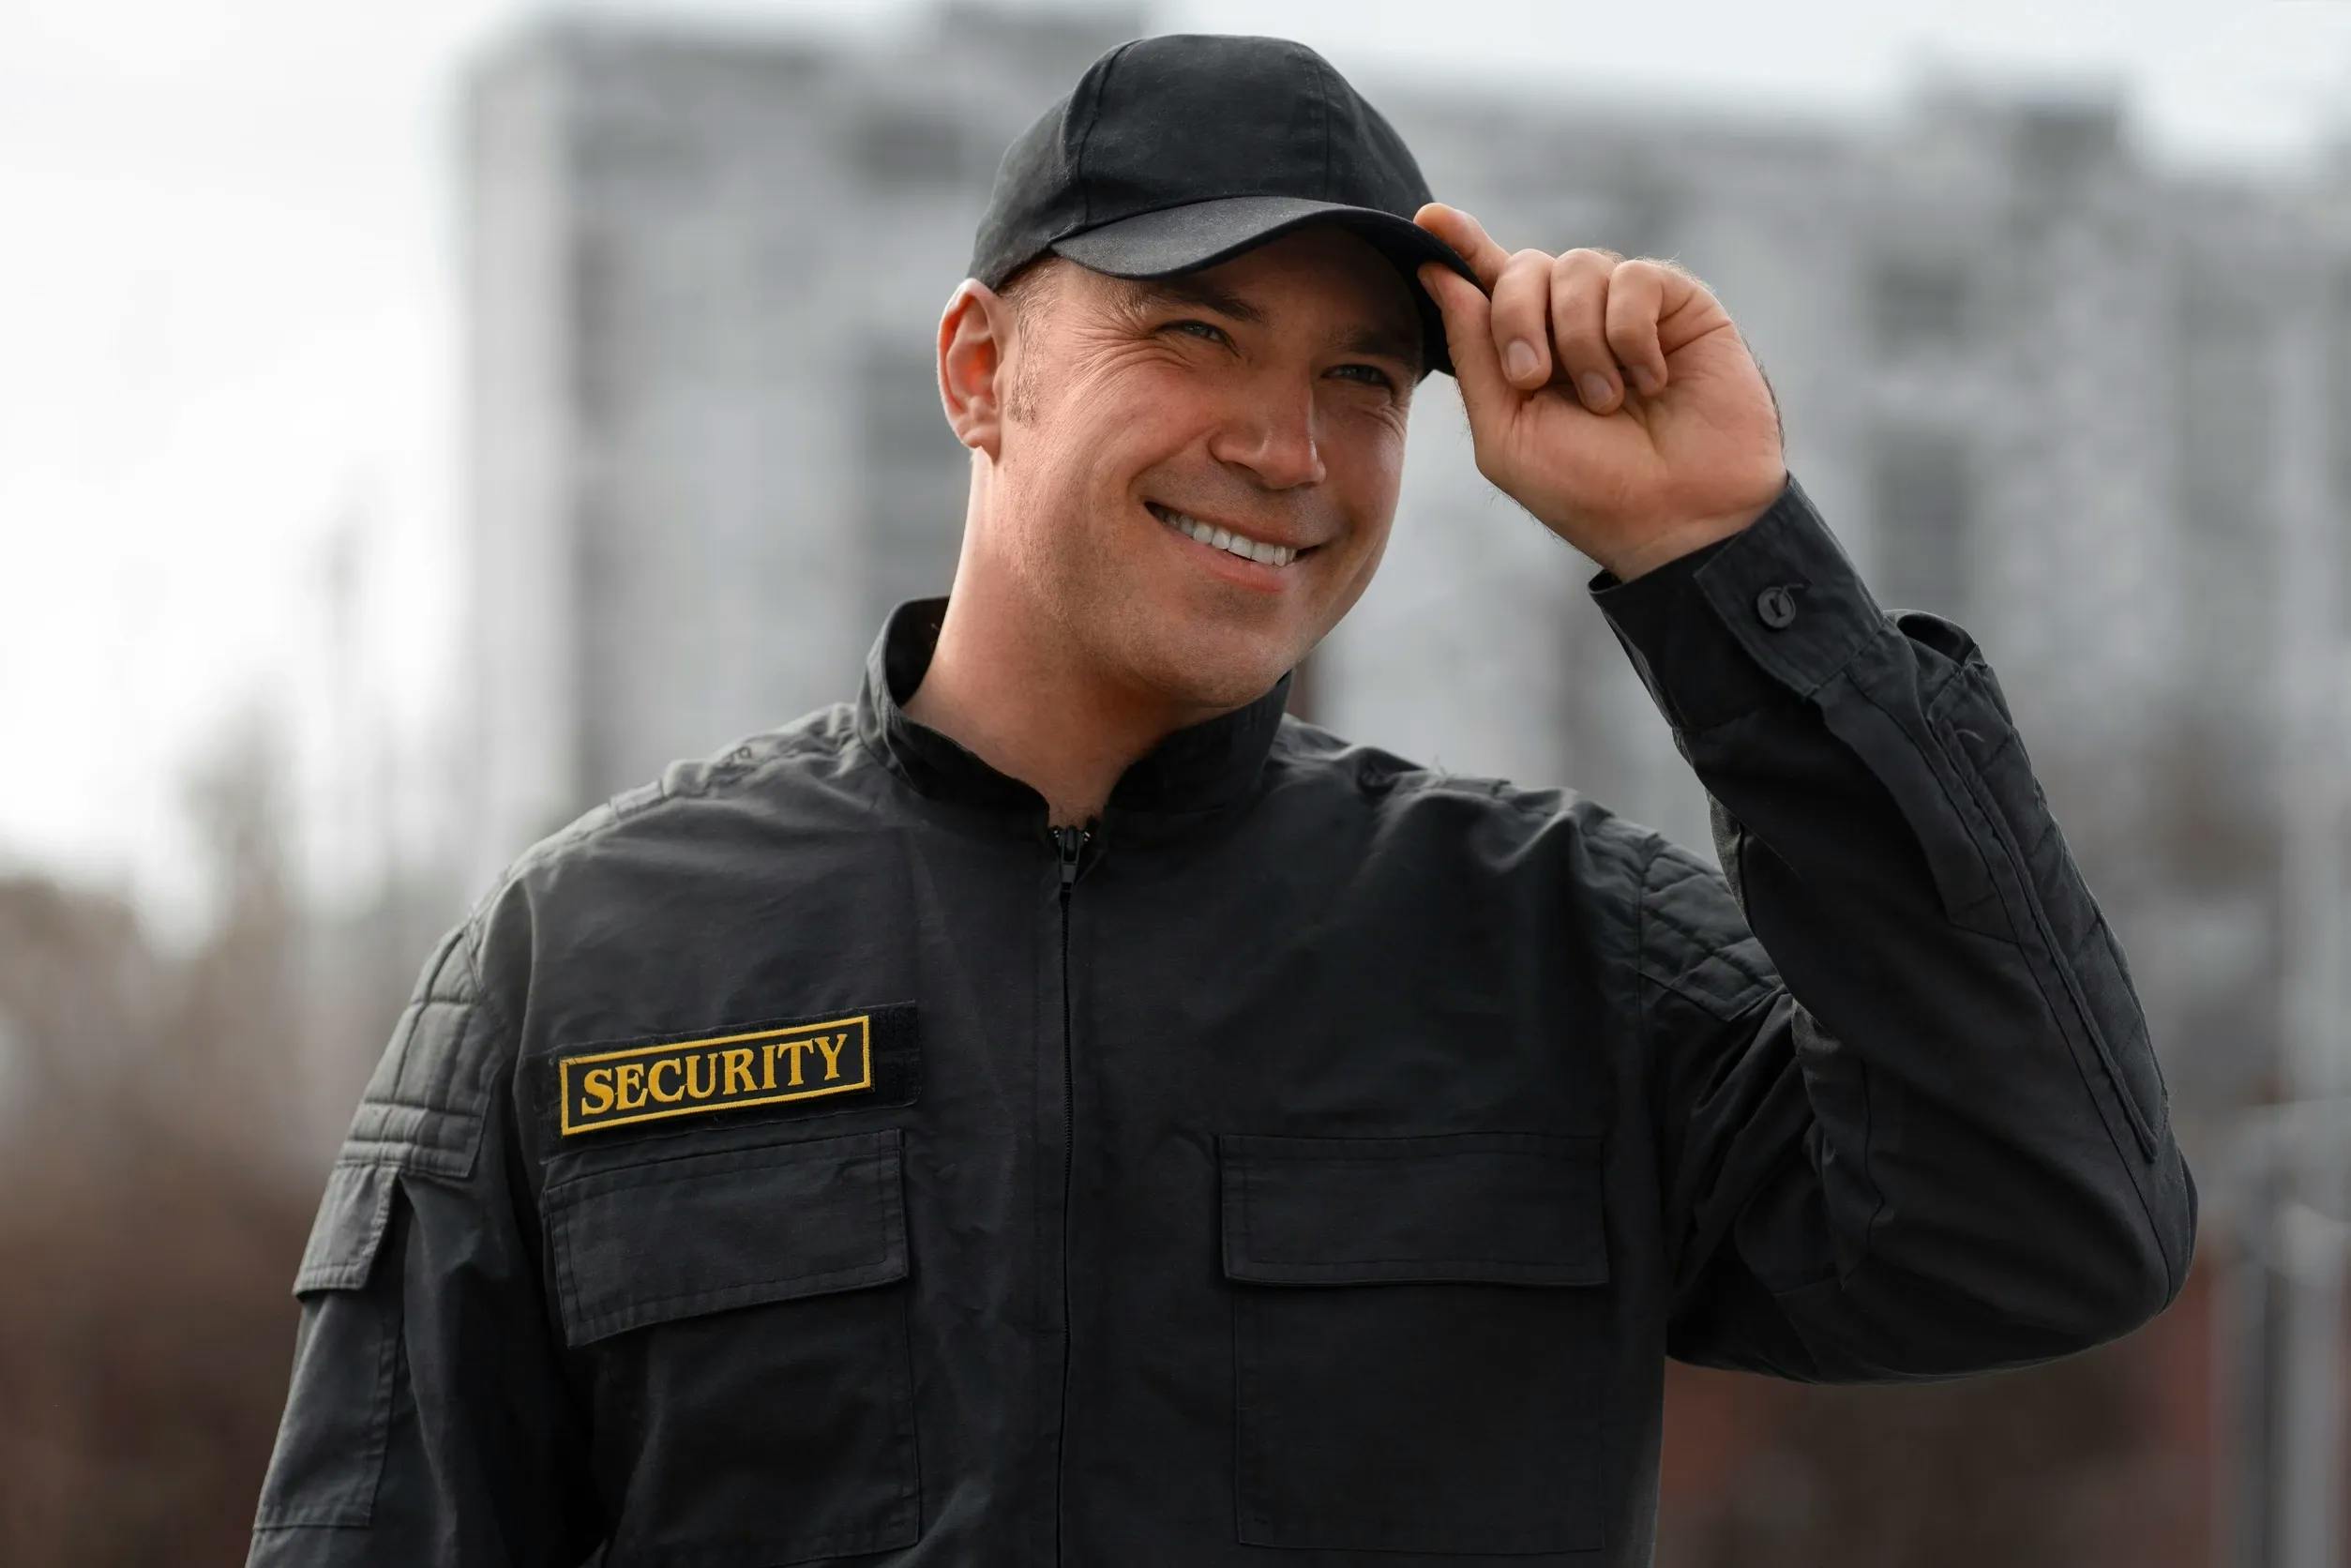 A security guard holding his cap while smiling